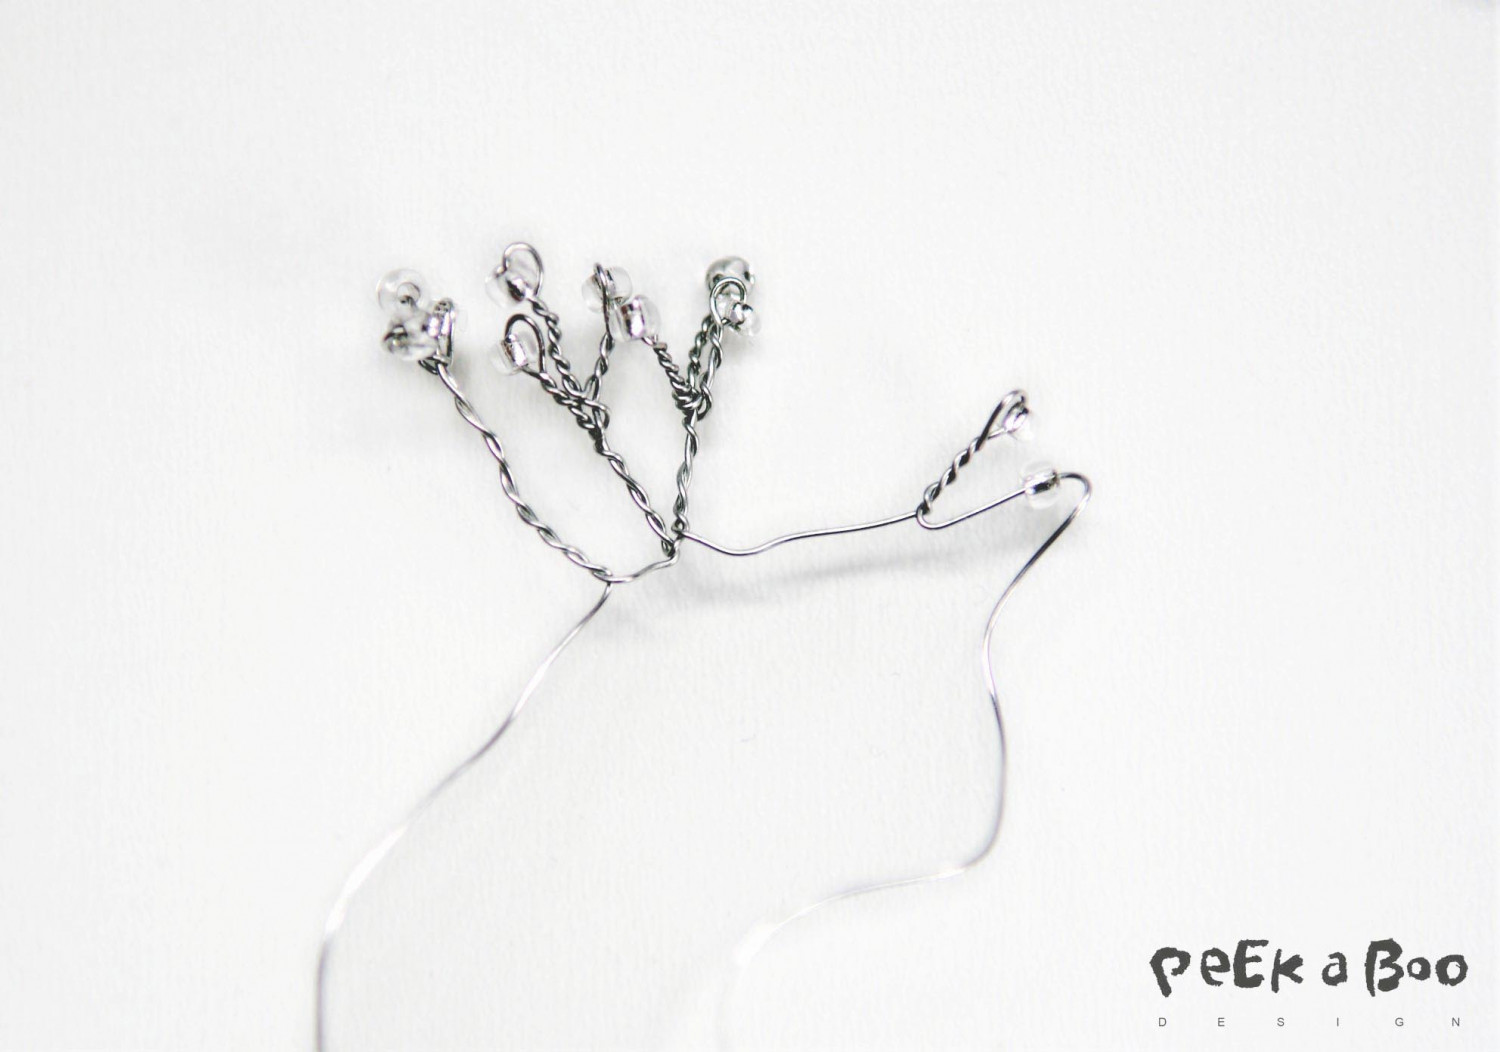 The stamen made of silver wire and seed beads in clear and silver colour and size #8.